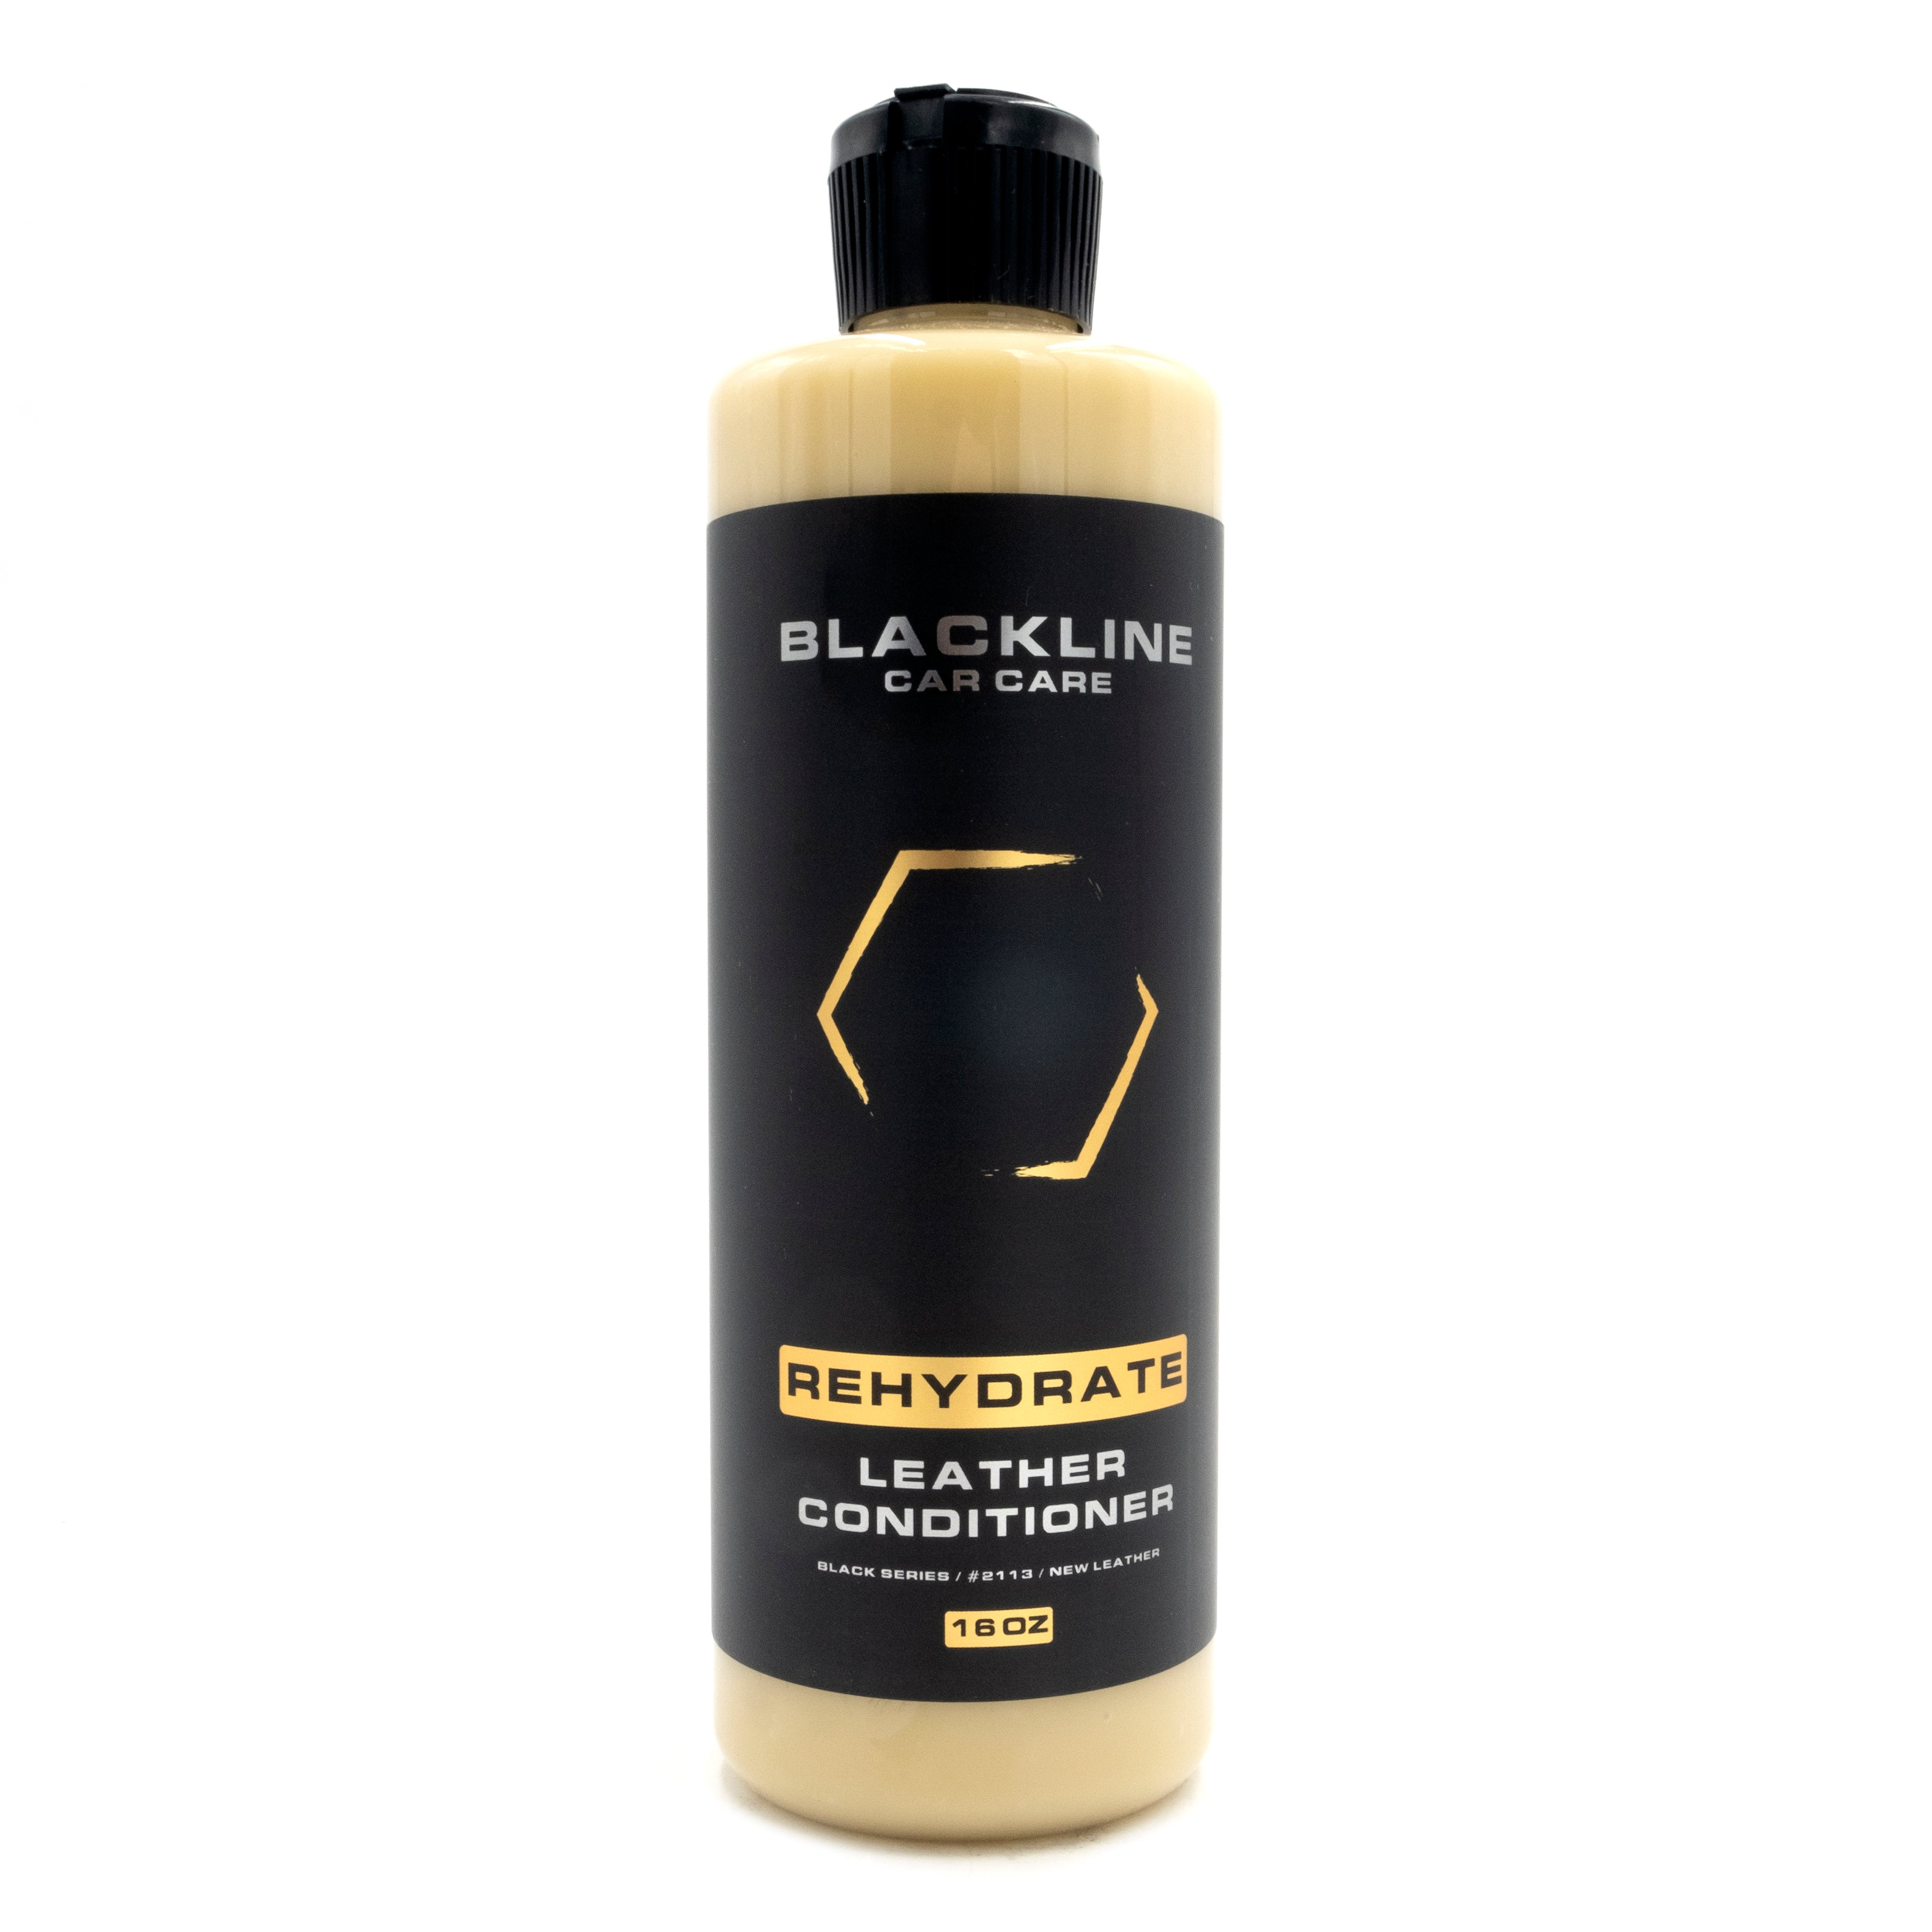 Blackline- Rehydrate Leather Conditioner